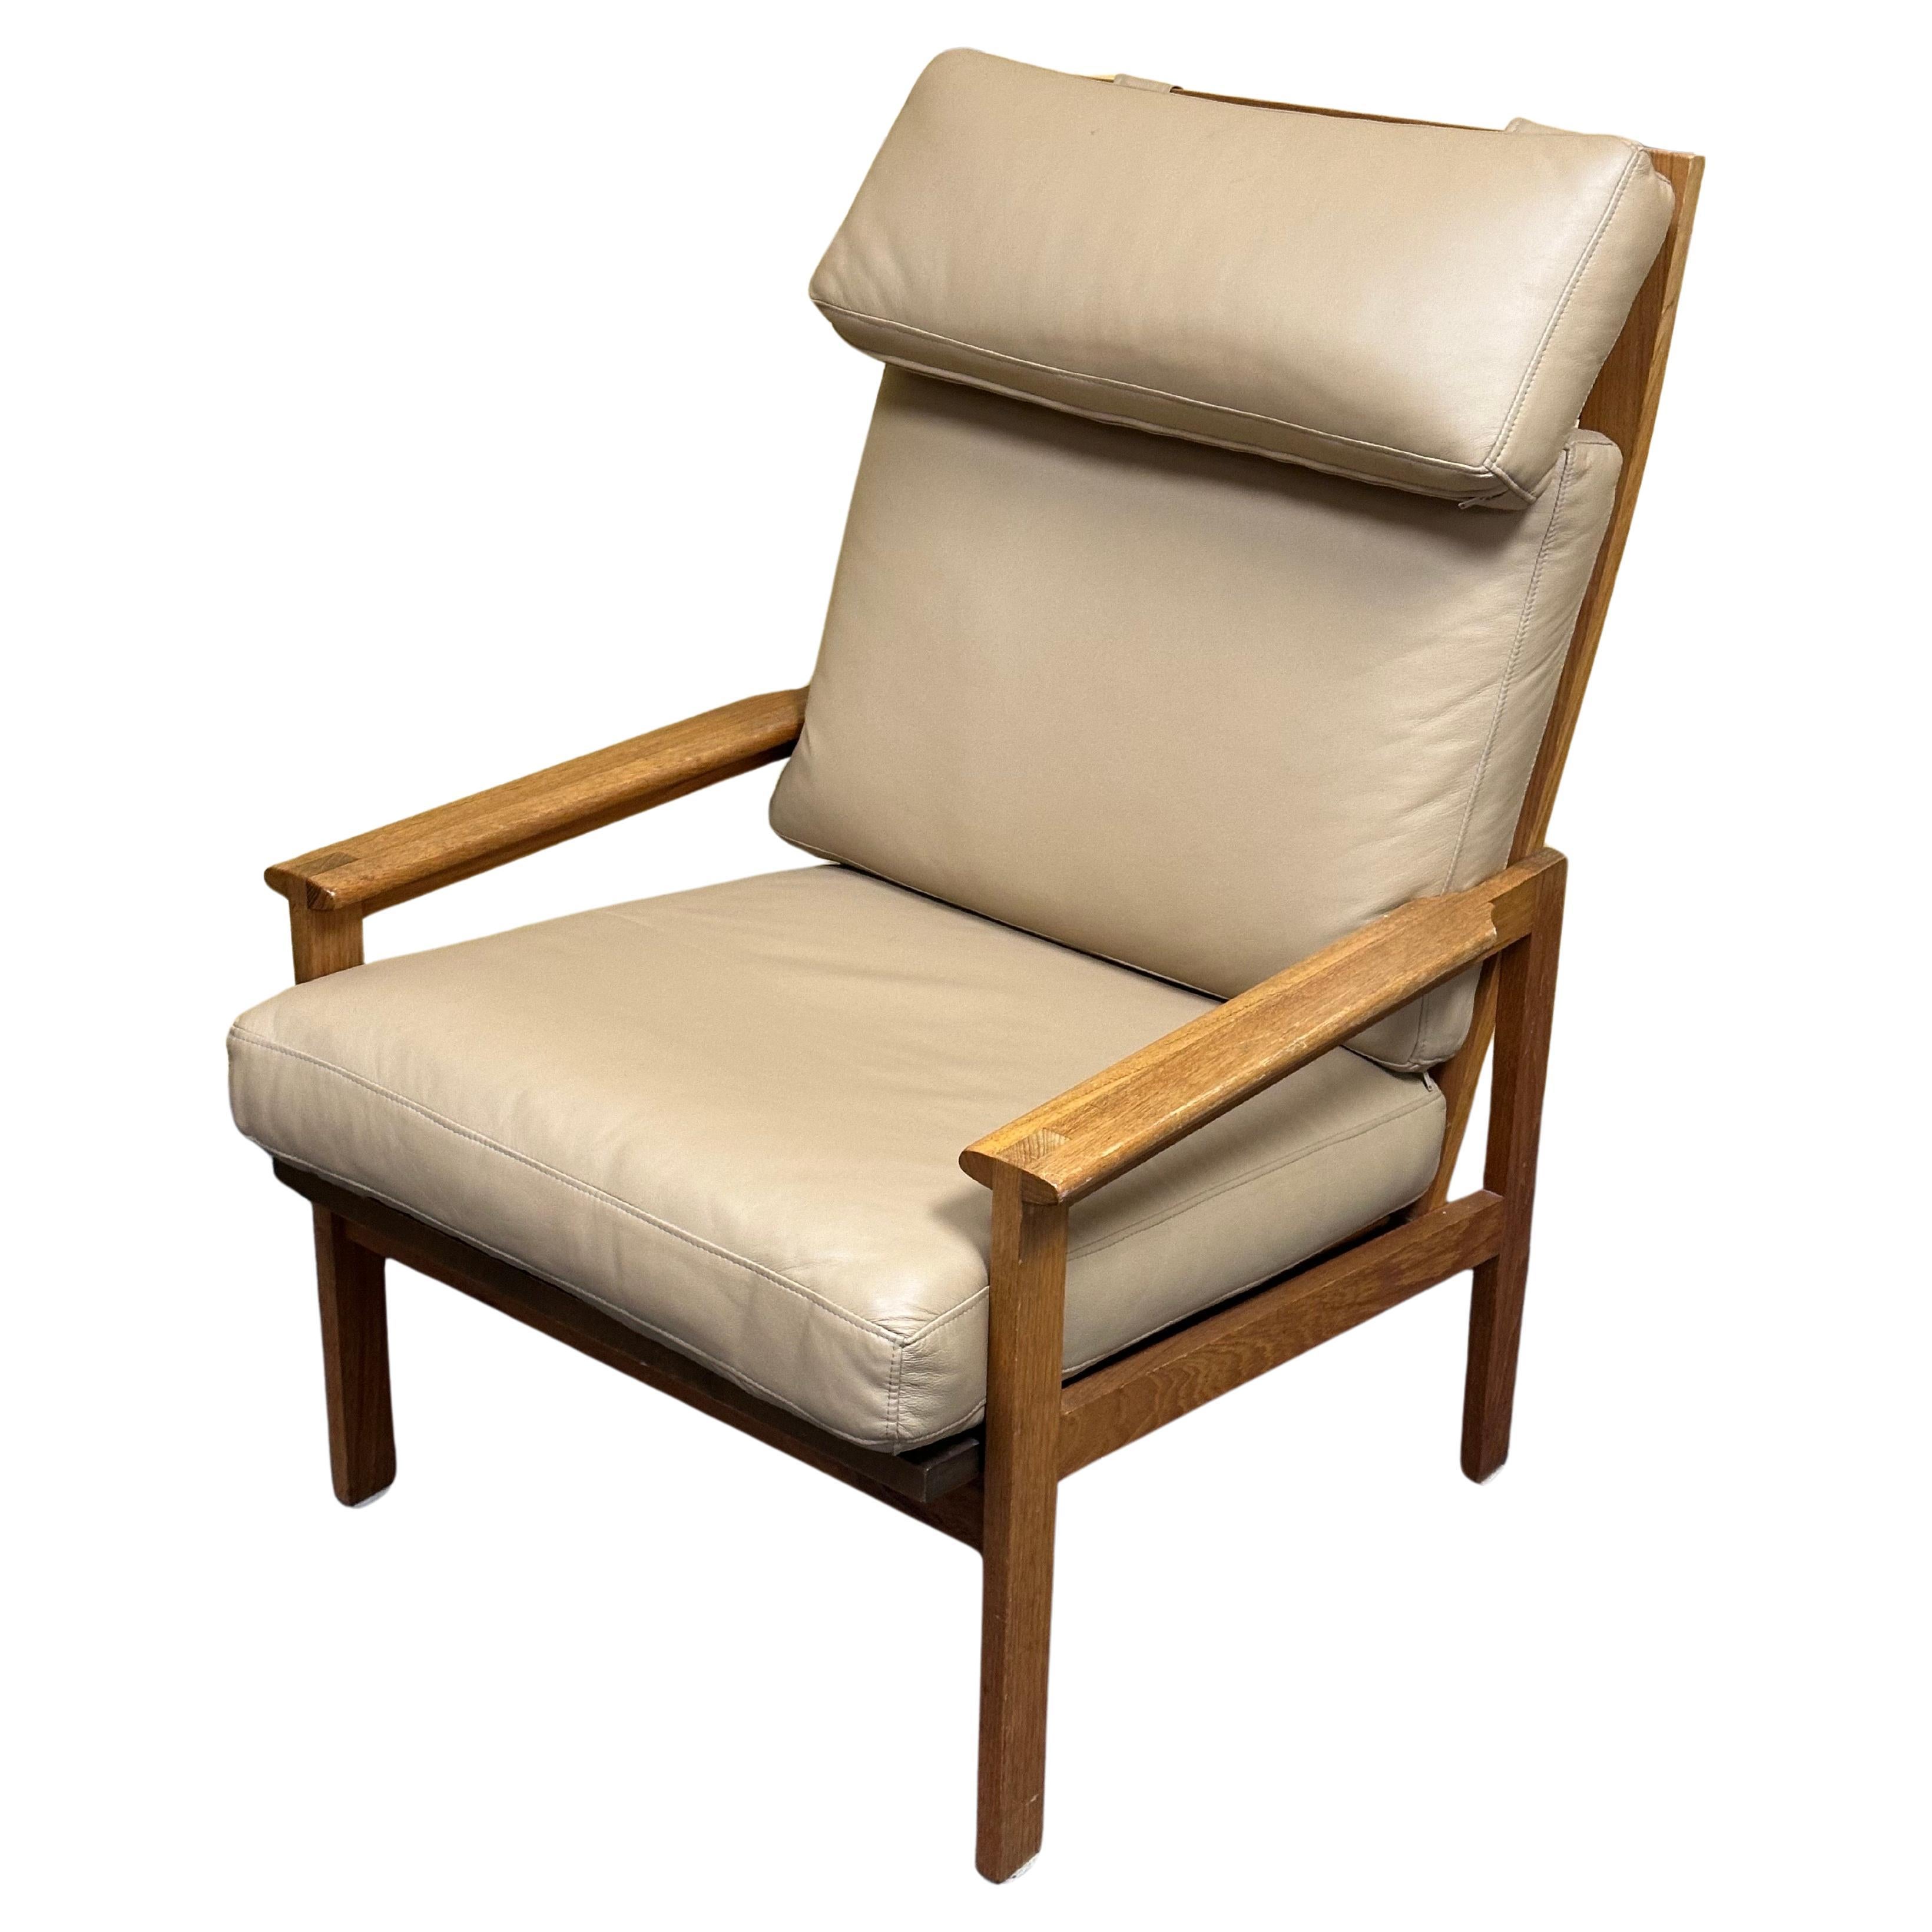 Post-Modern Danish Modern Solid Teak and Leather High Back Armchair by Niels Eilersen For Sale